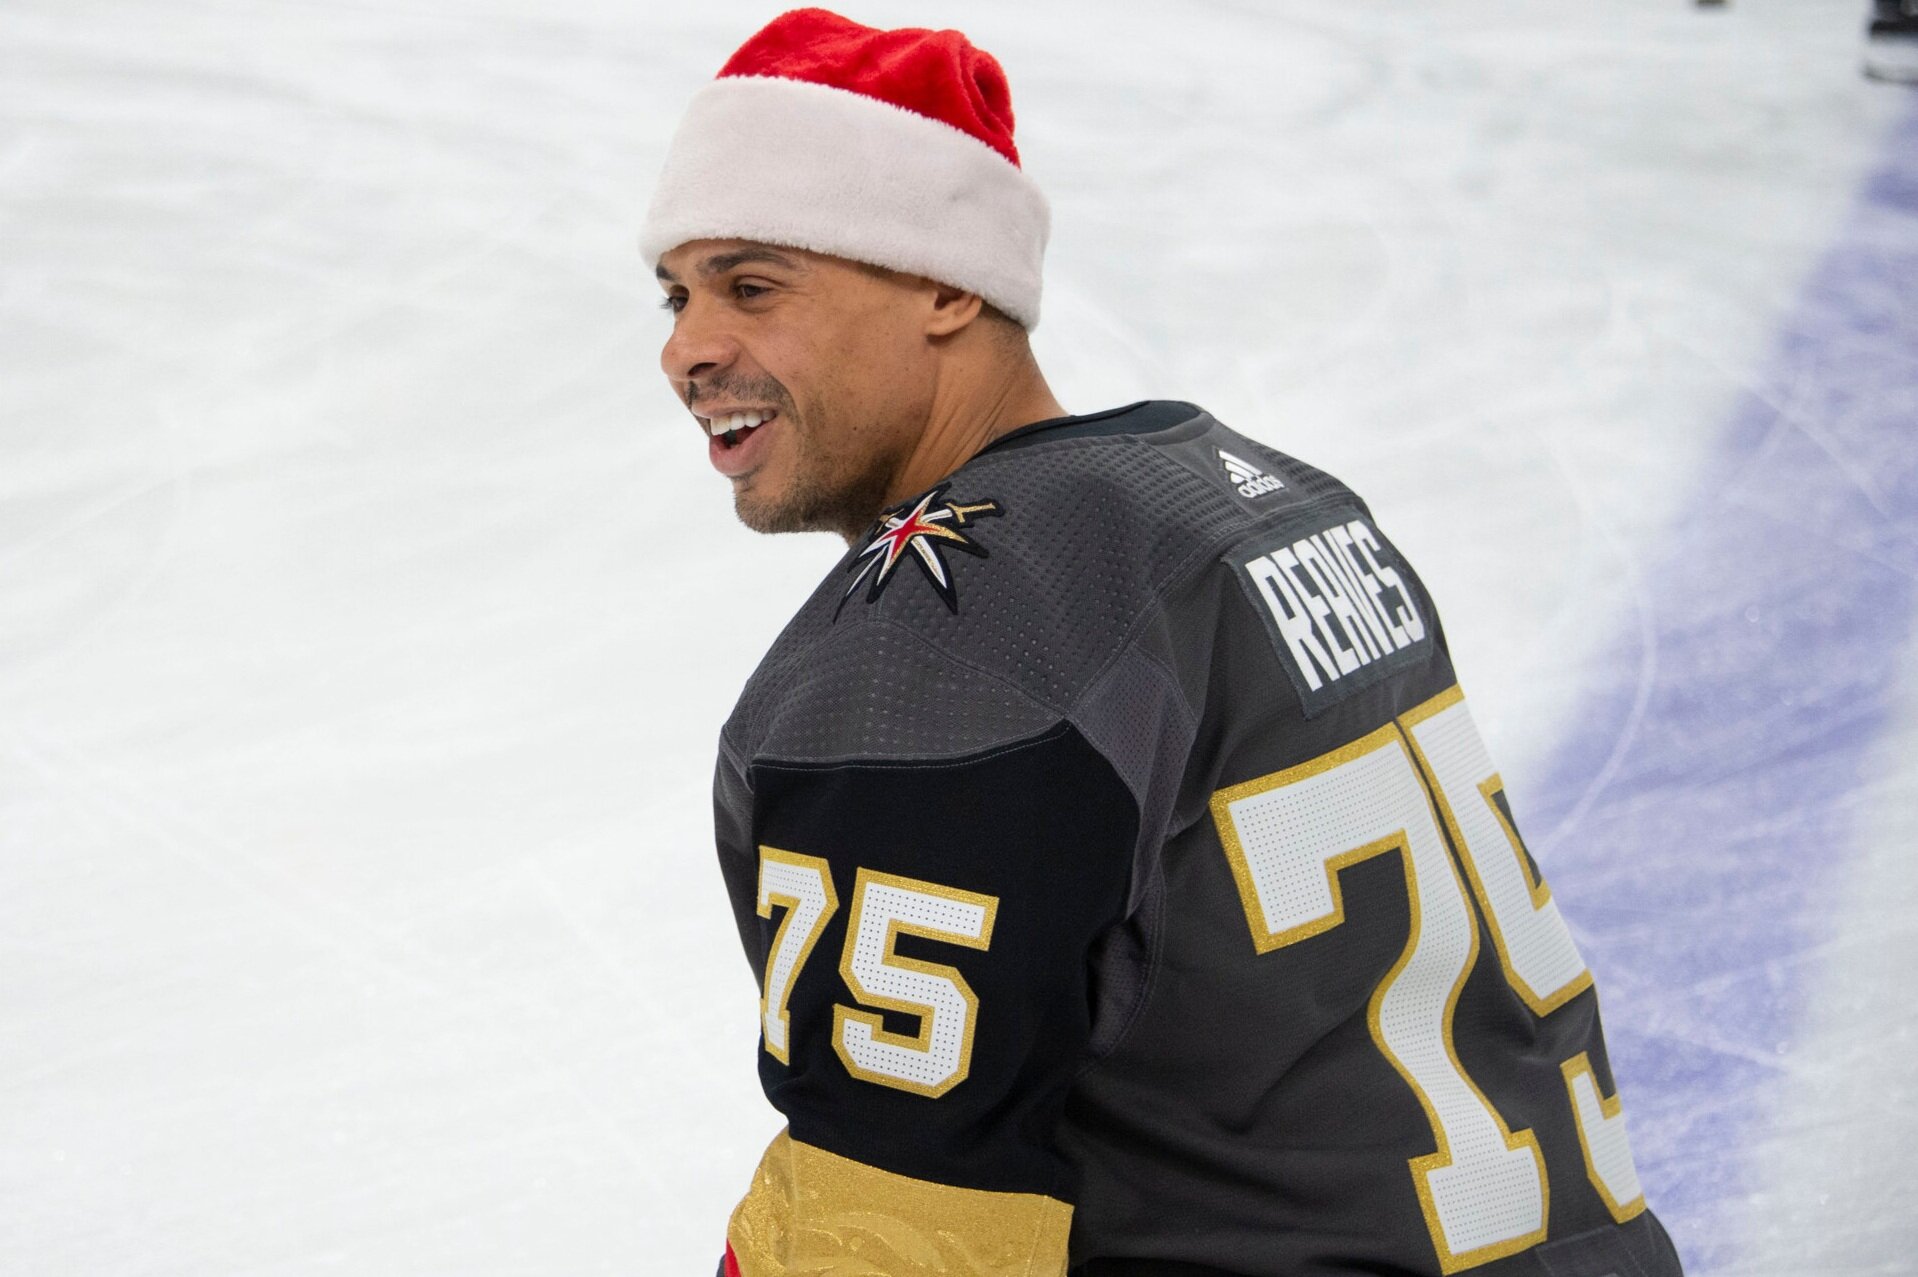 Upset That Ryan Reaves Took A Knee For Racial Equality During Anthem,  Golden Knights Season Ticket Holder Quits Watching VGK Games - LVSportsBiz